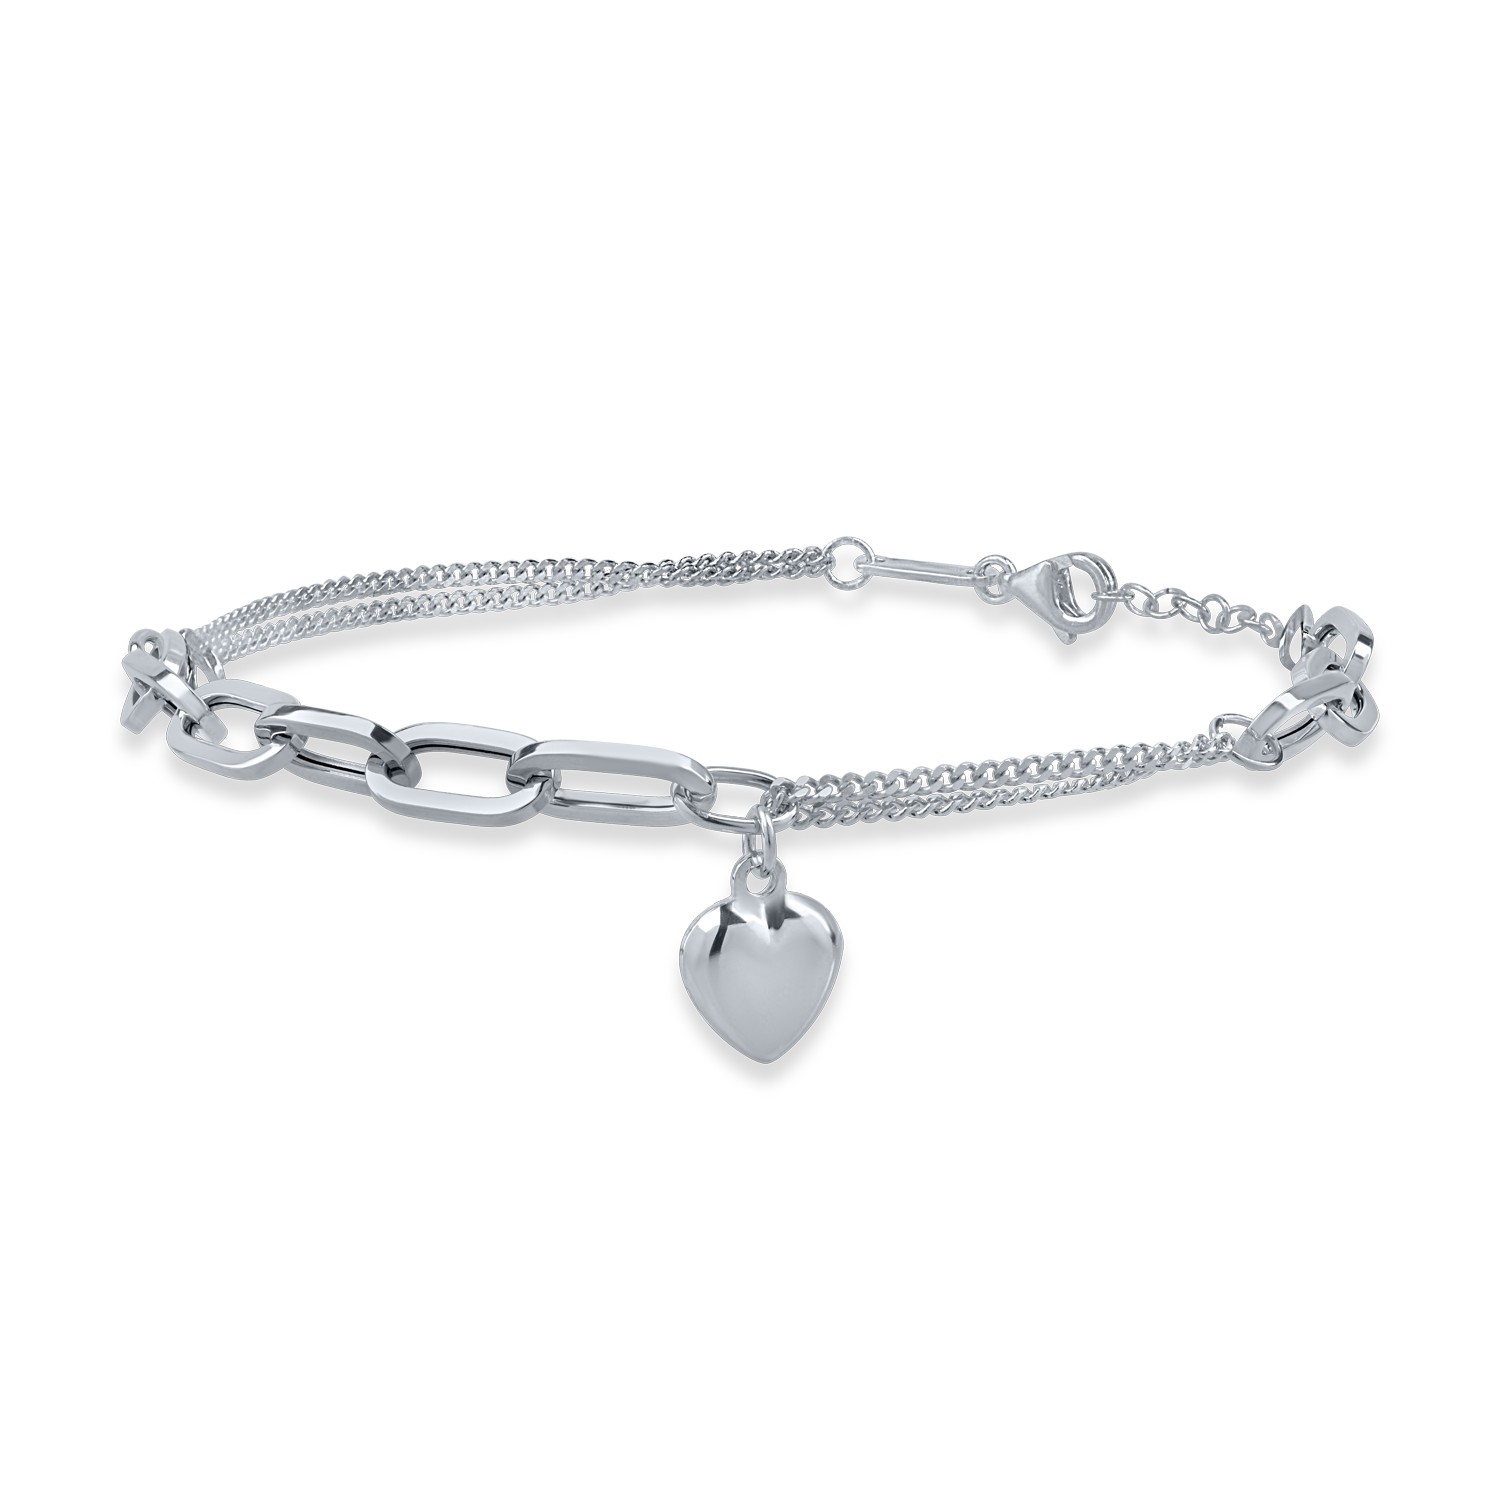 White gold link chain and heart bracelet